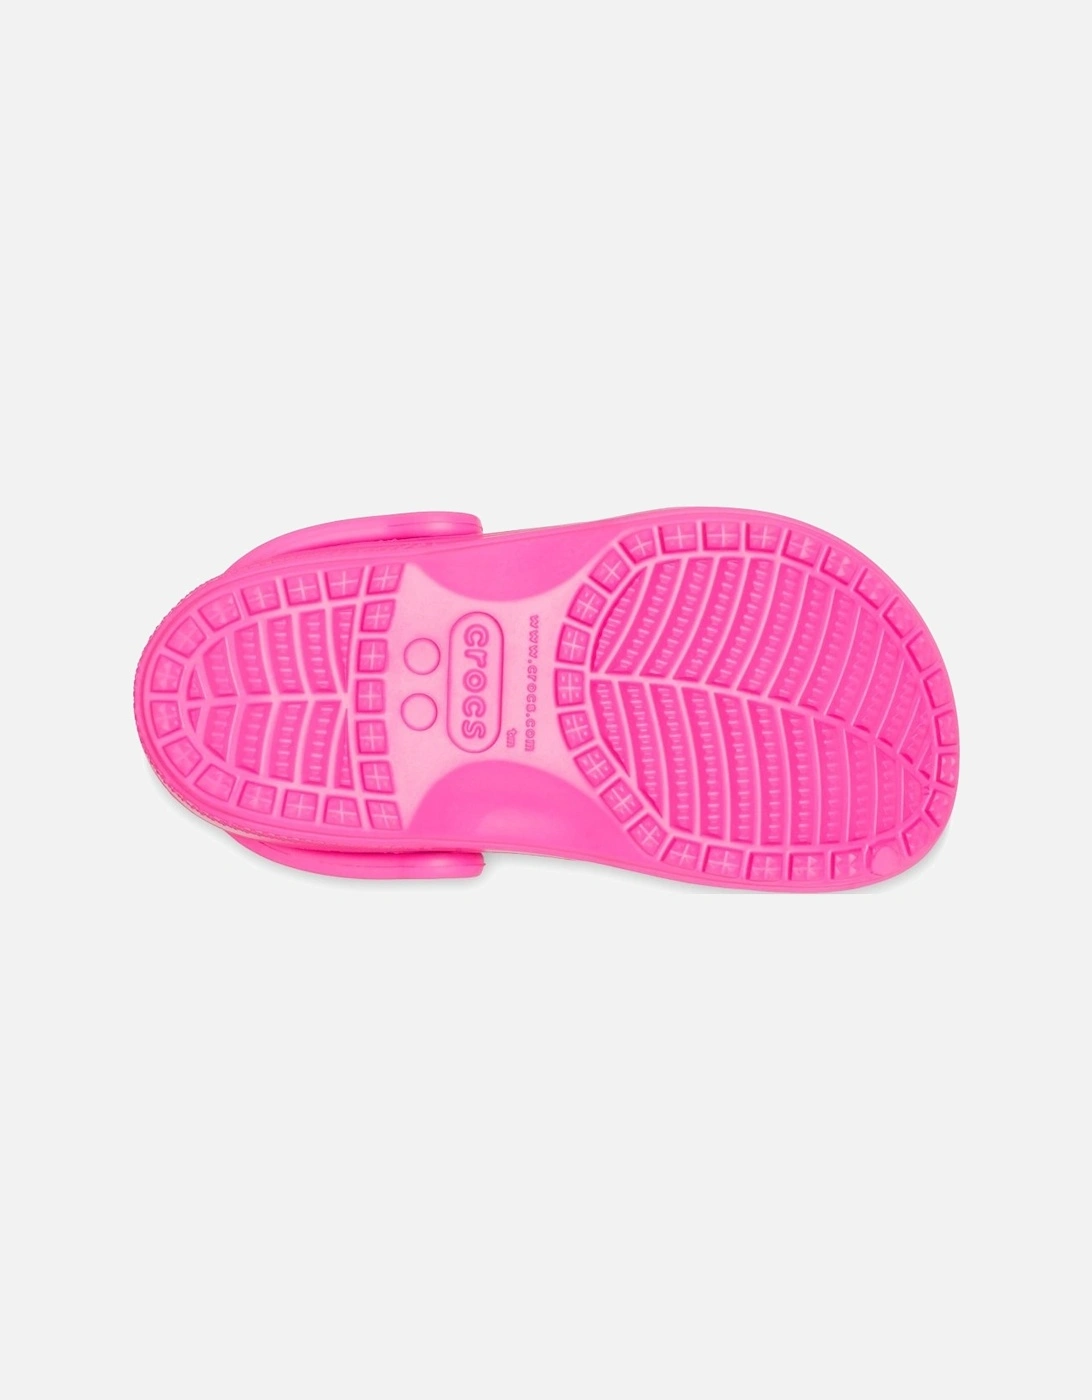 Classic Girls Toddler Sandals